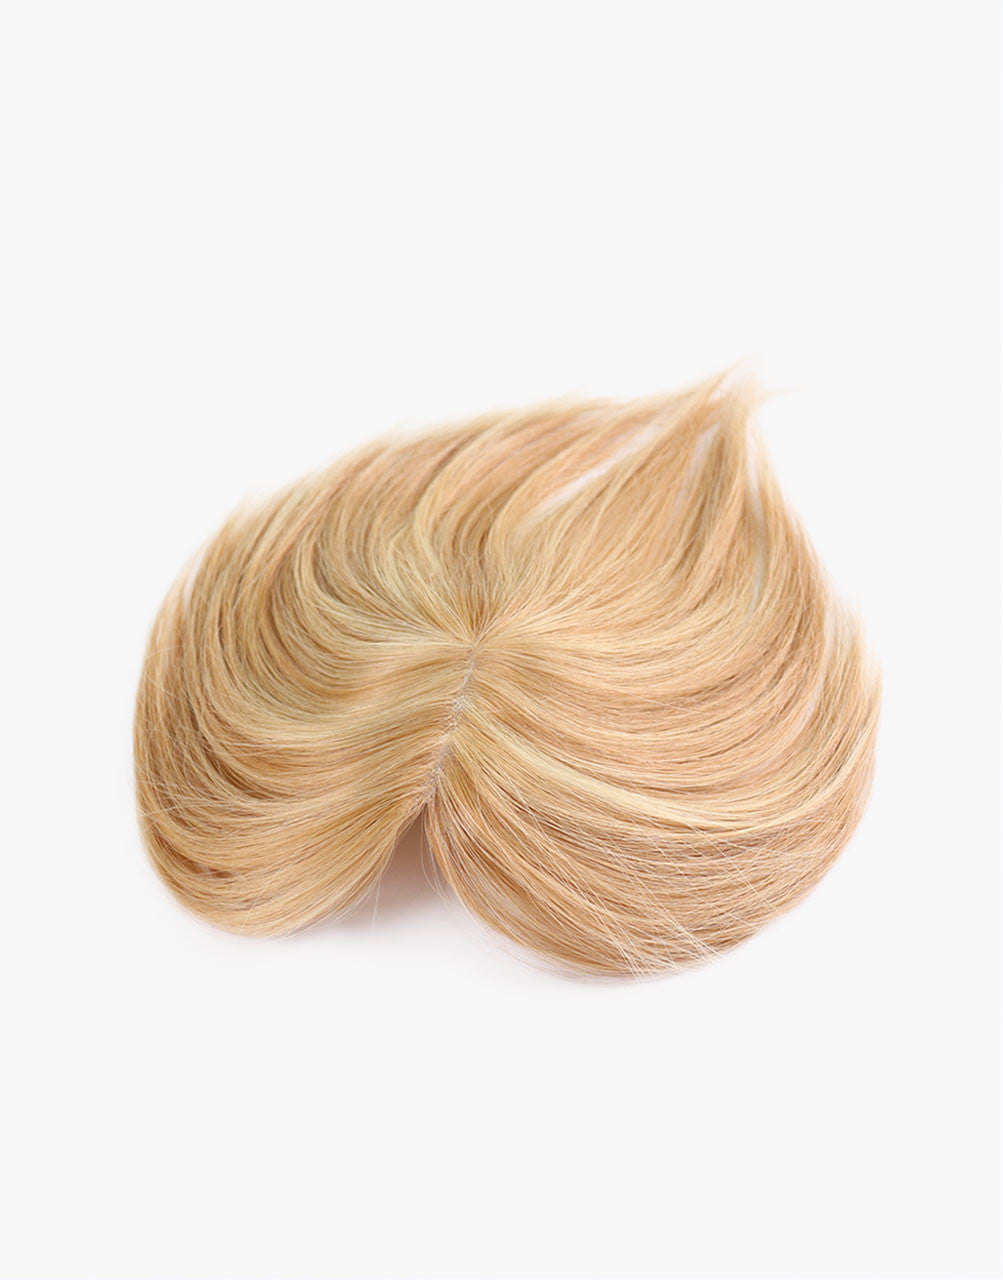 sherry top piece clip-in extension in blonde